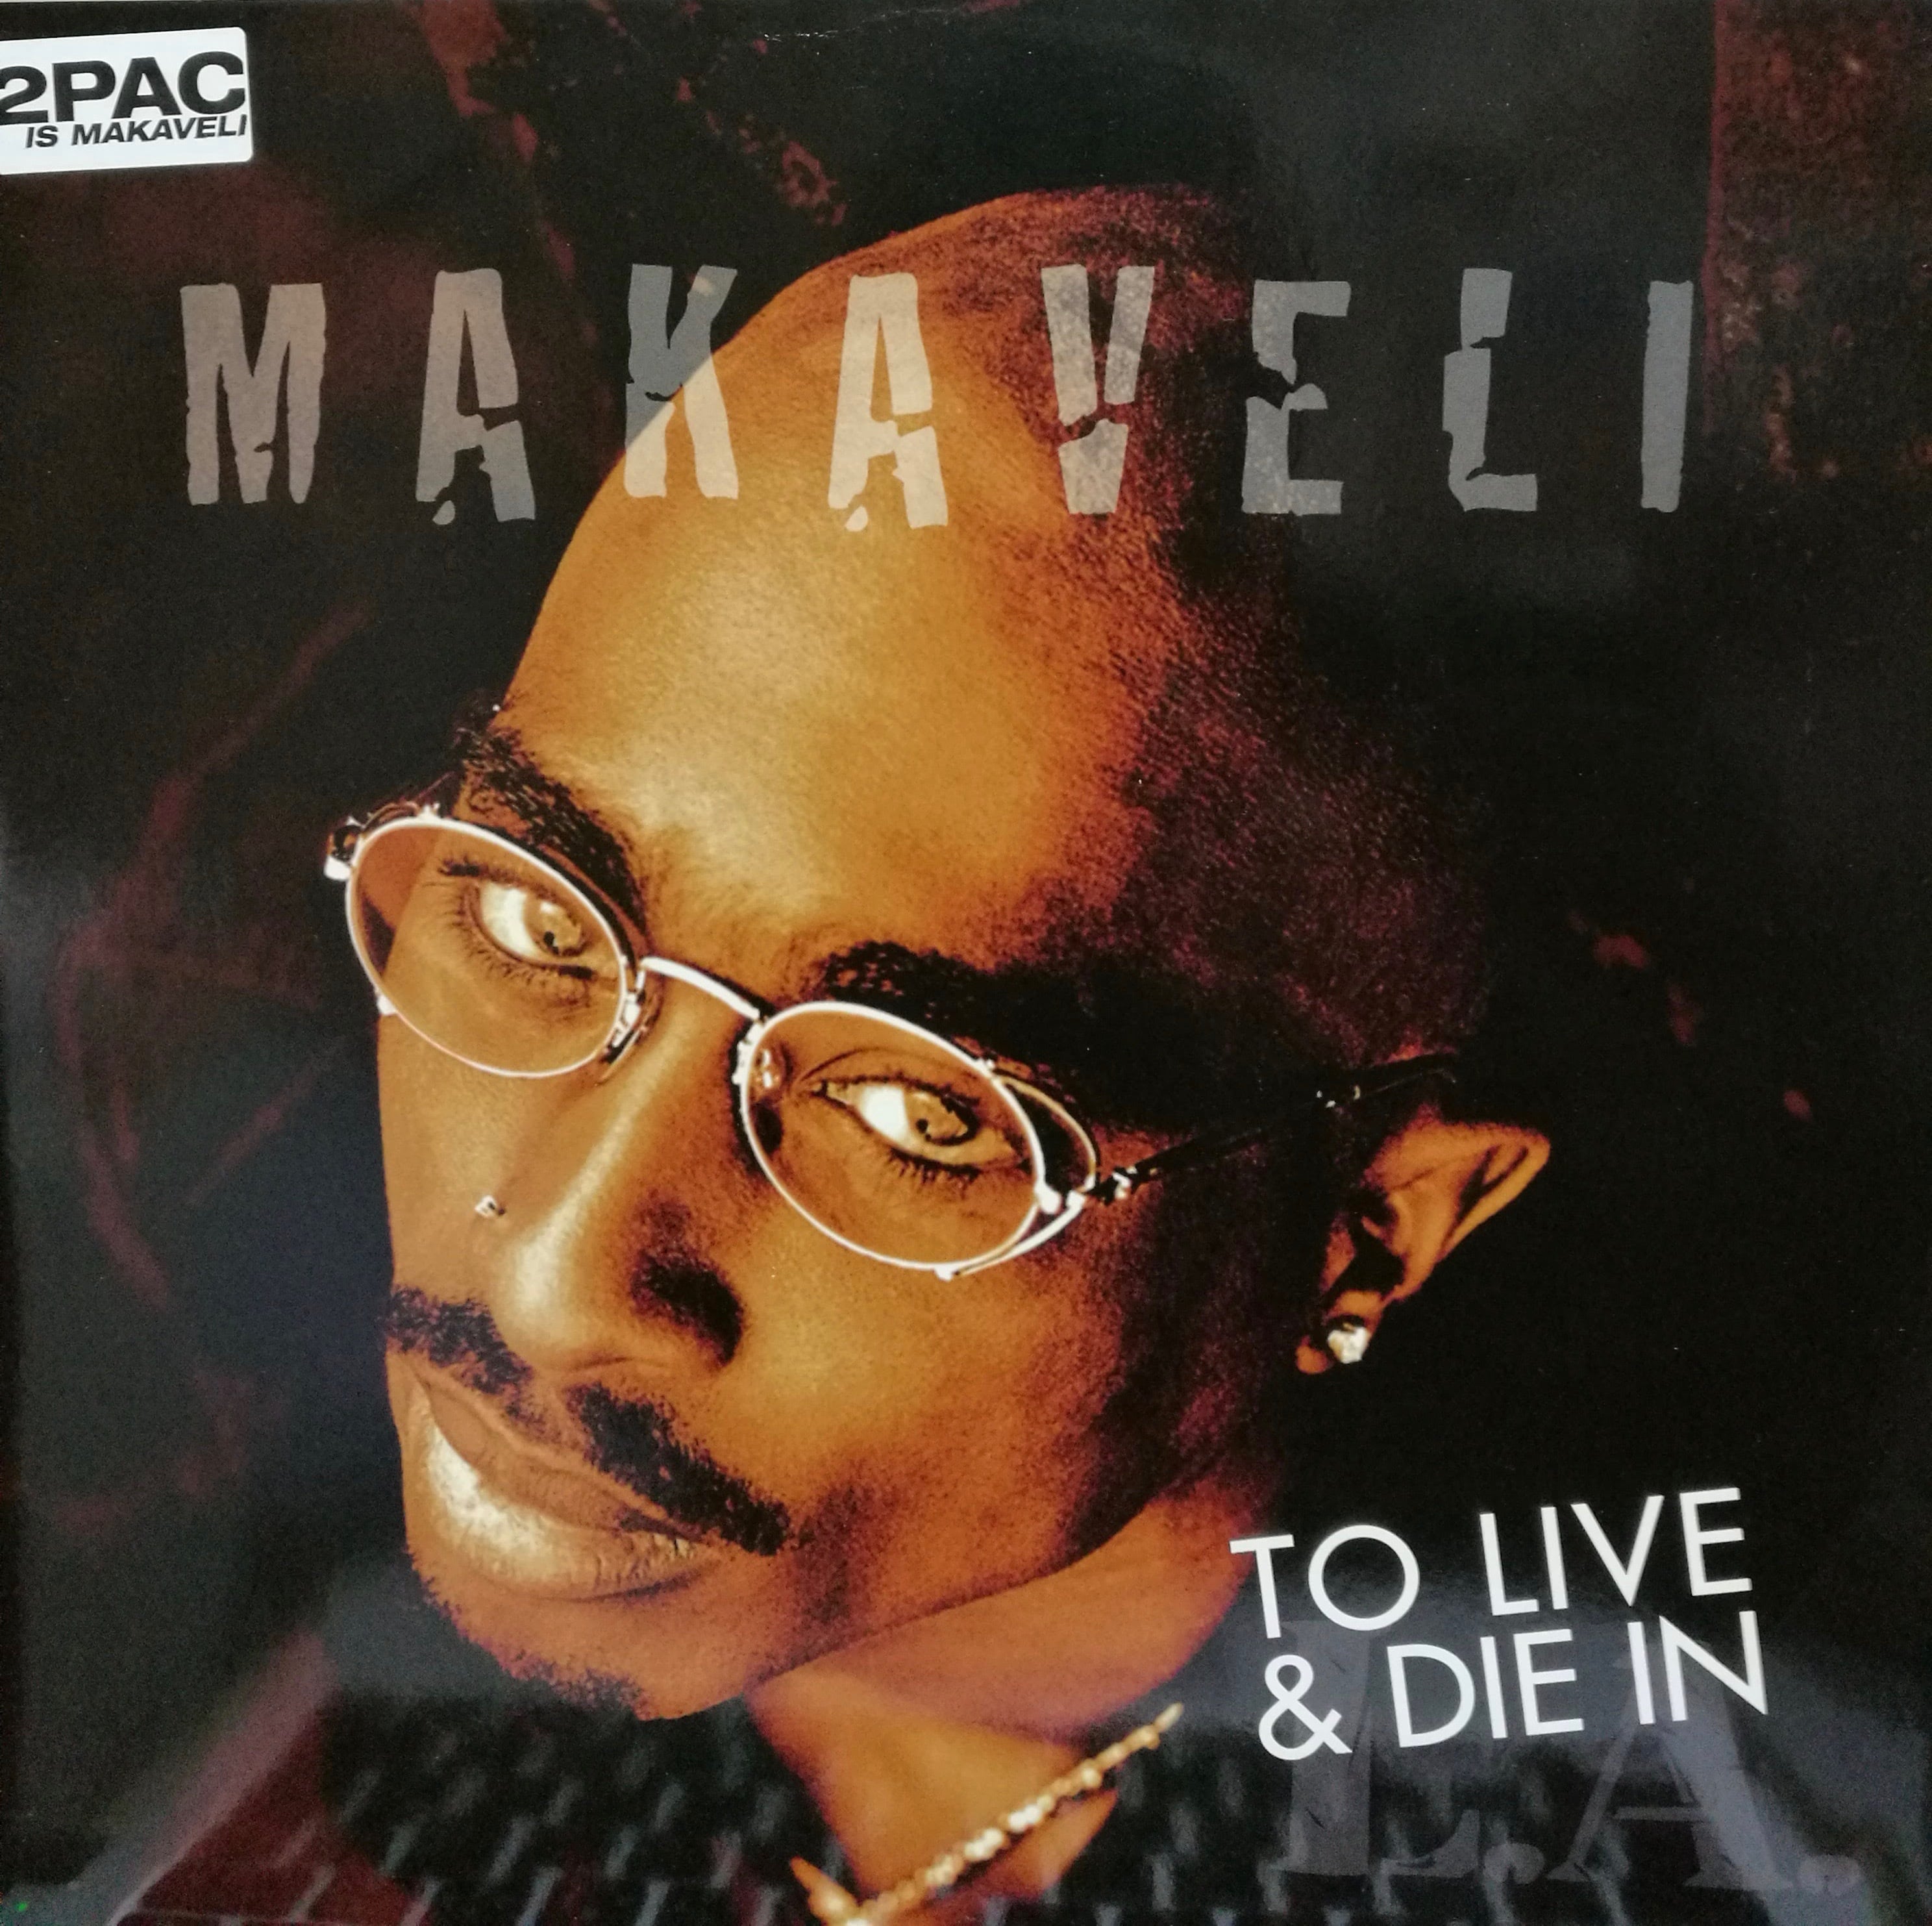 12inch】Makaveli (2 PAC) To Live  Die In COMPACT DISCO ASIA